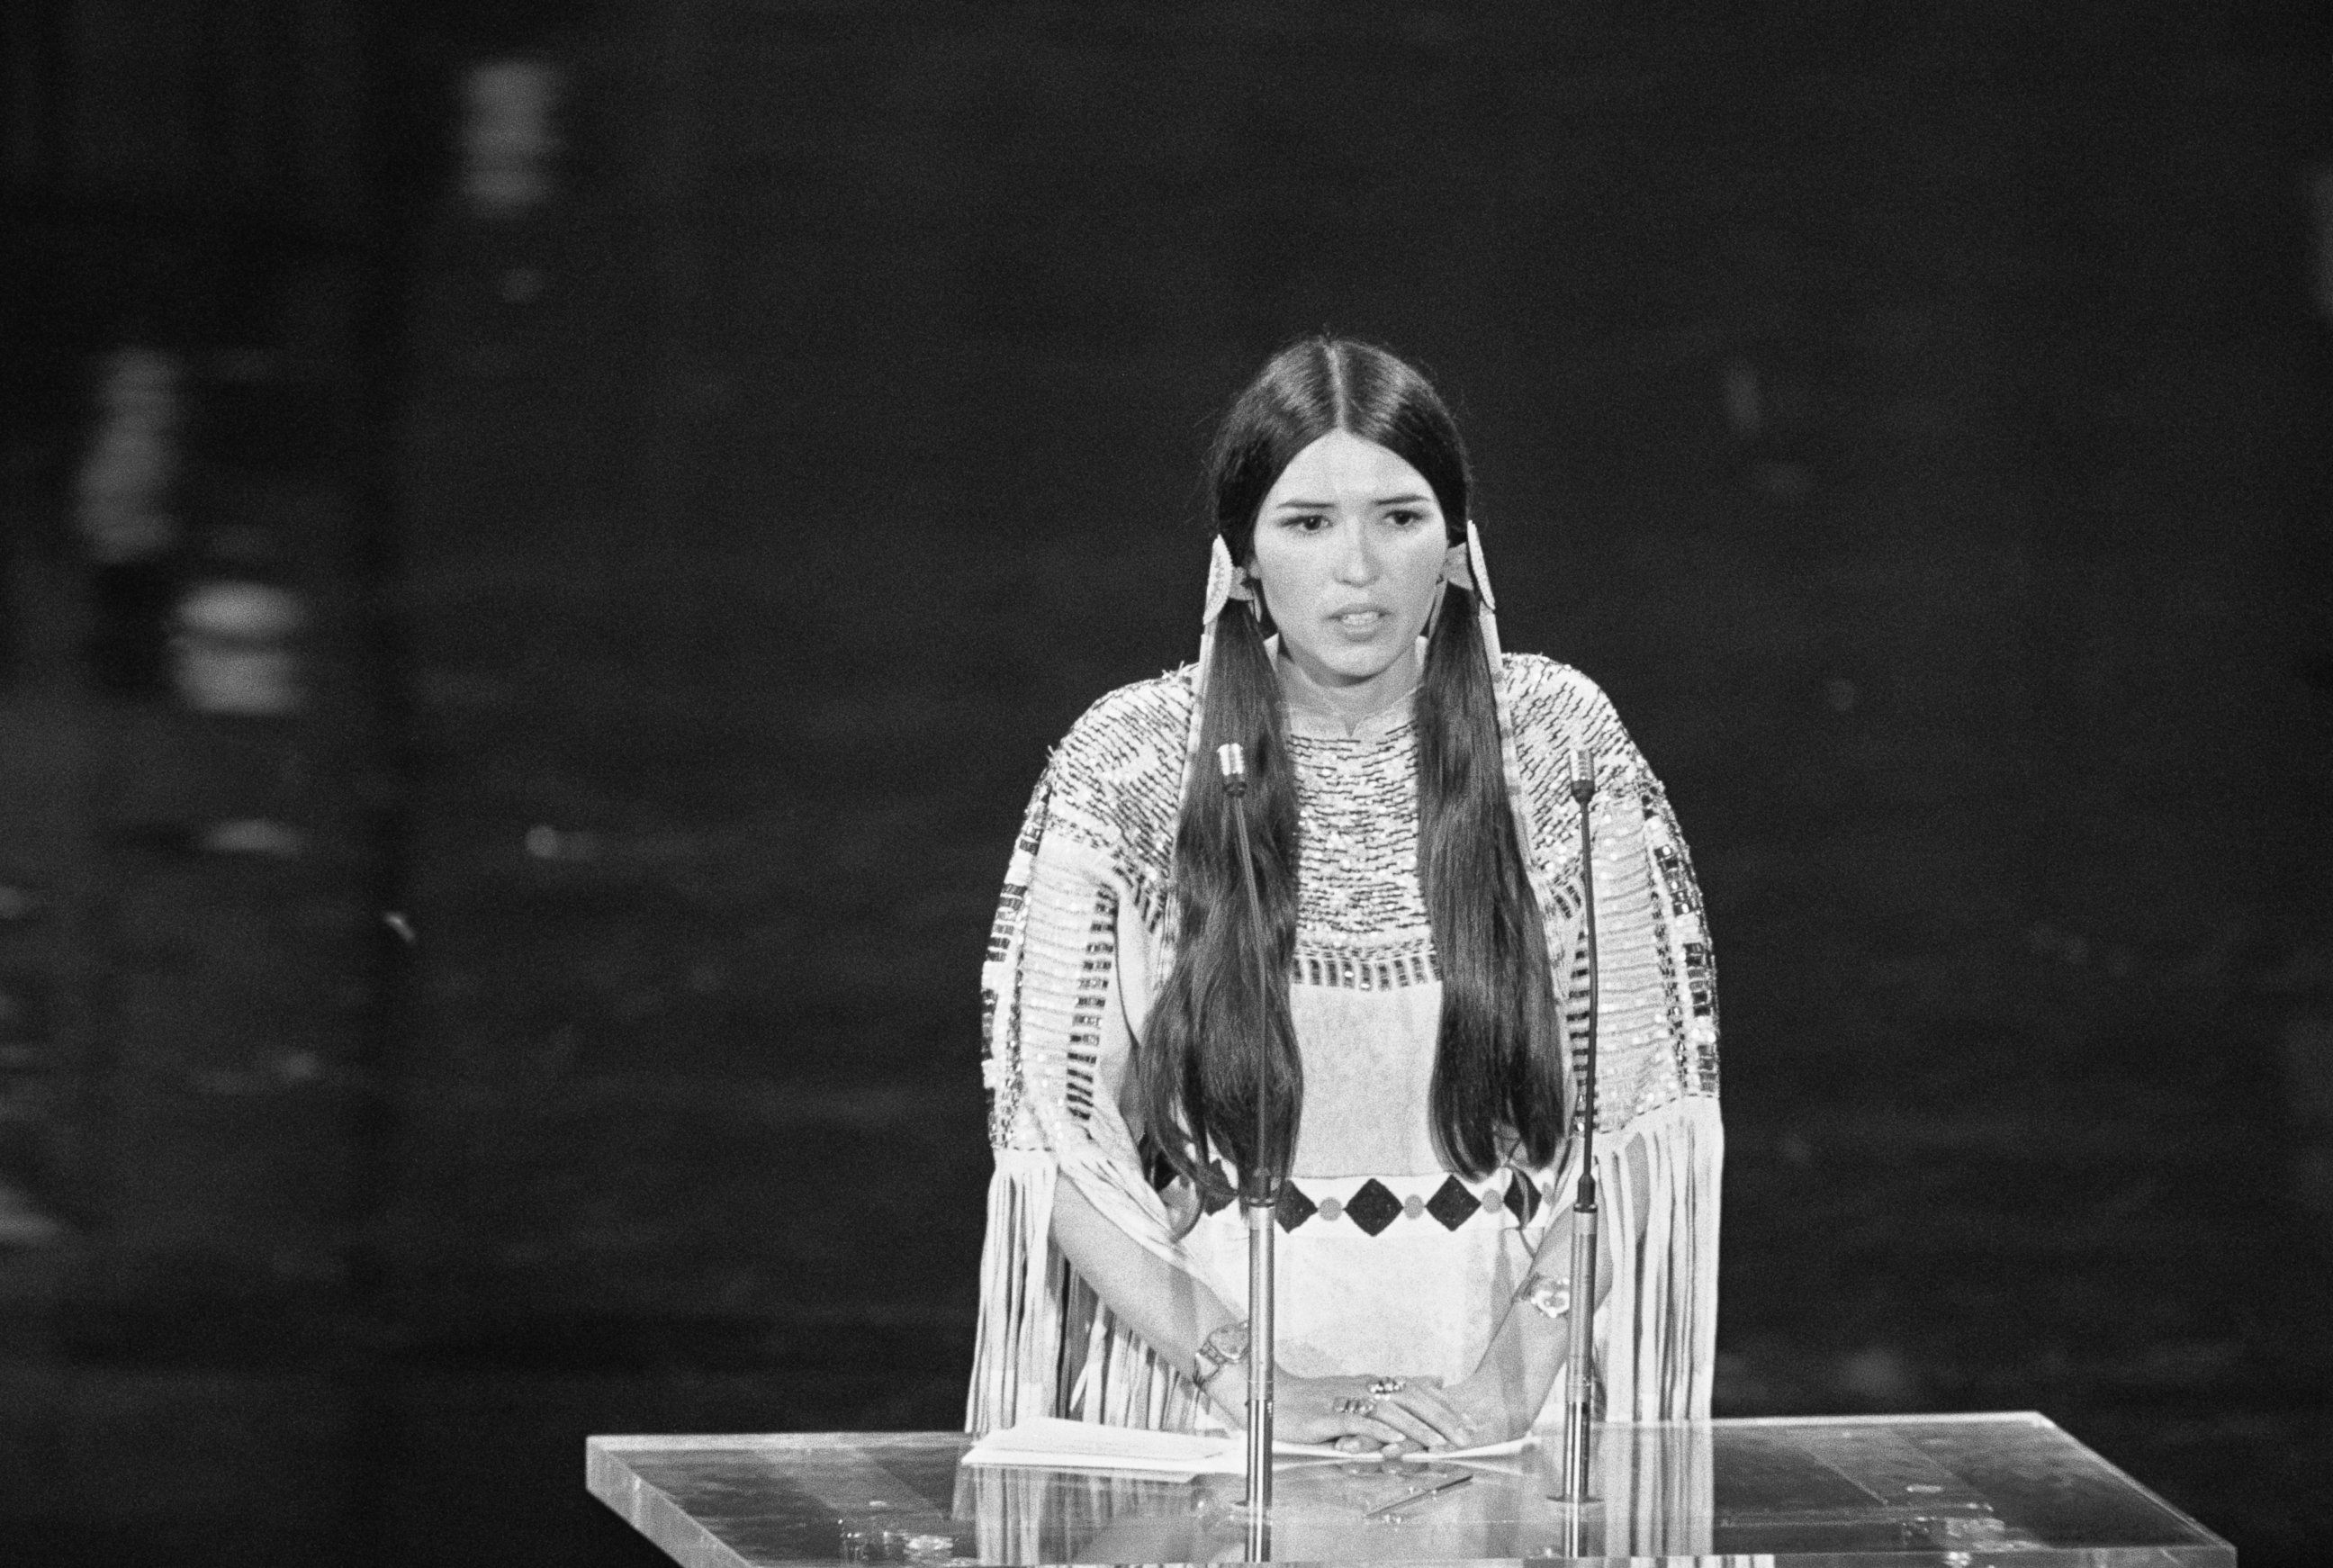 PHOTO: Native American Sacheen Littlefeather speaks at the 45th Academy Awards on behalf of Marlon Brando, she refused the Best Actor award he was awarded for his role in Godfather, March 27, 1973. 